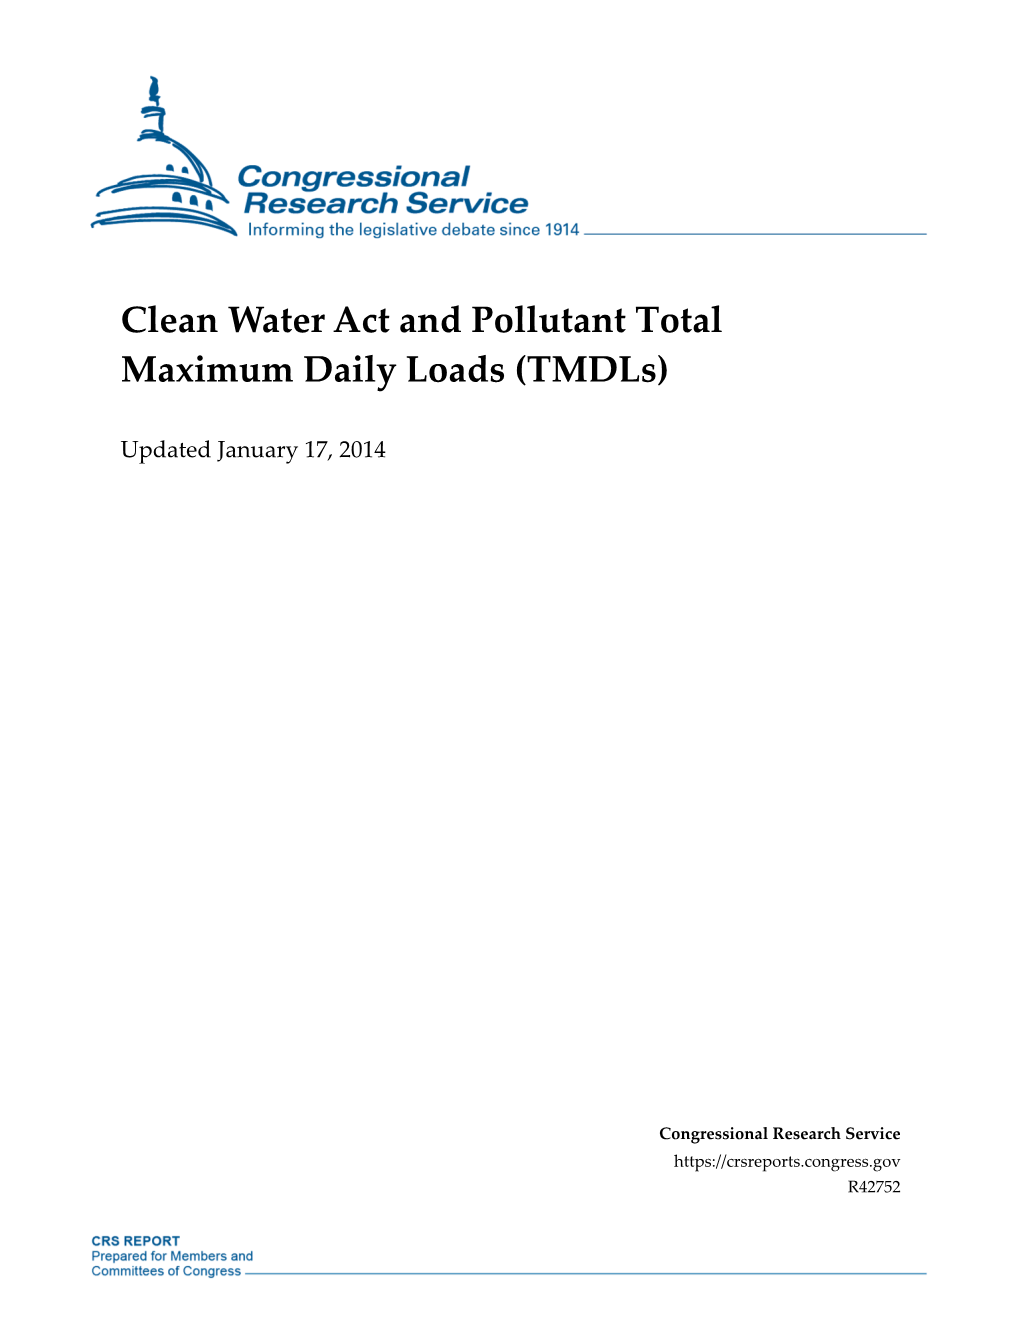 Clean Water Act and Pollutant Total Maximum Daily Loads (Tmdls)